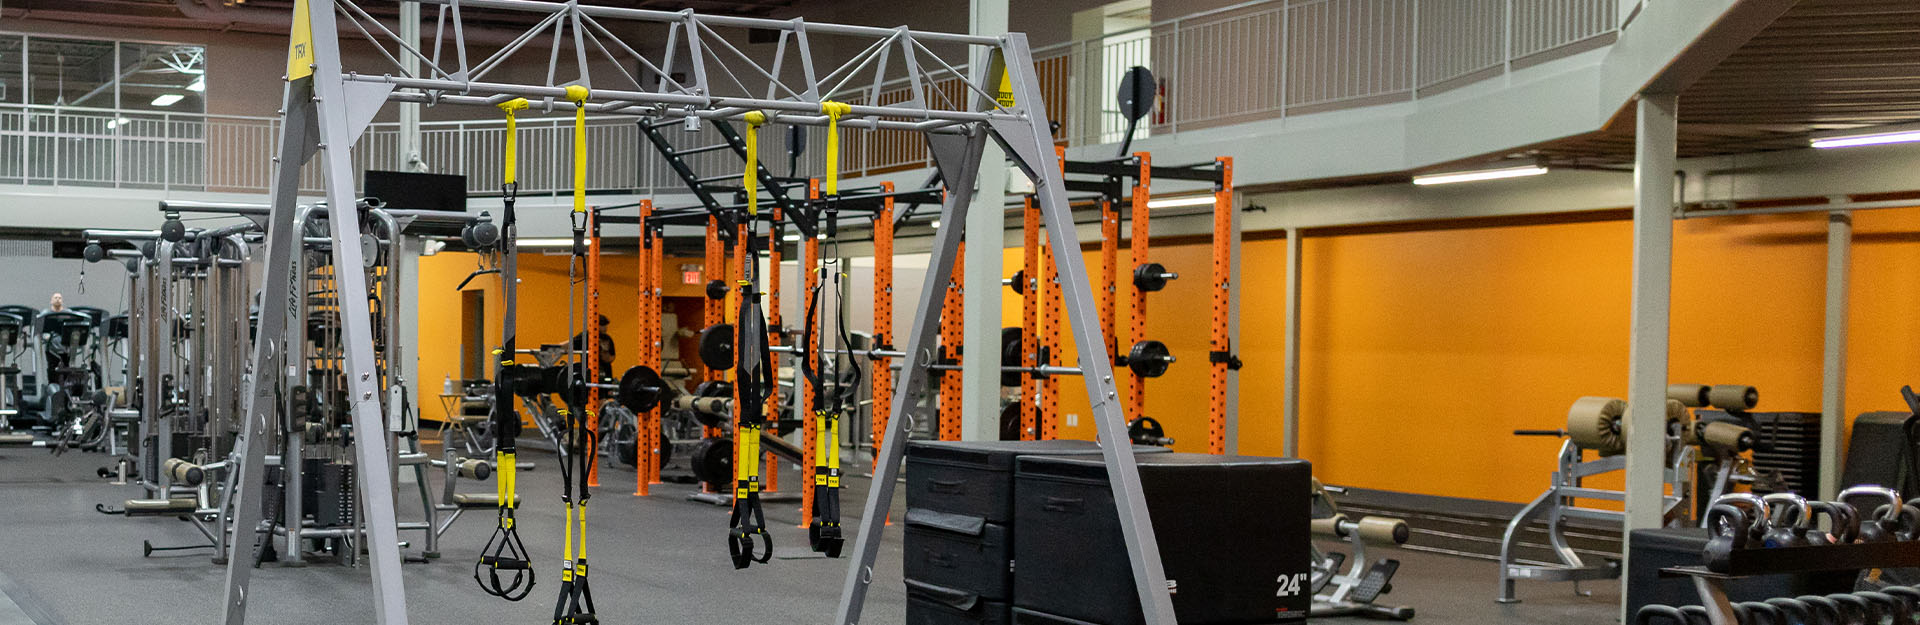 small group training area in modern gym